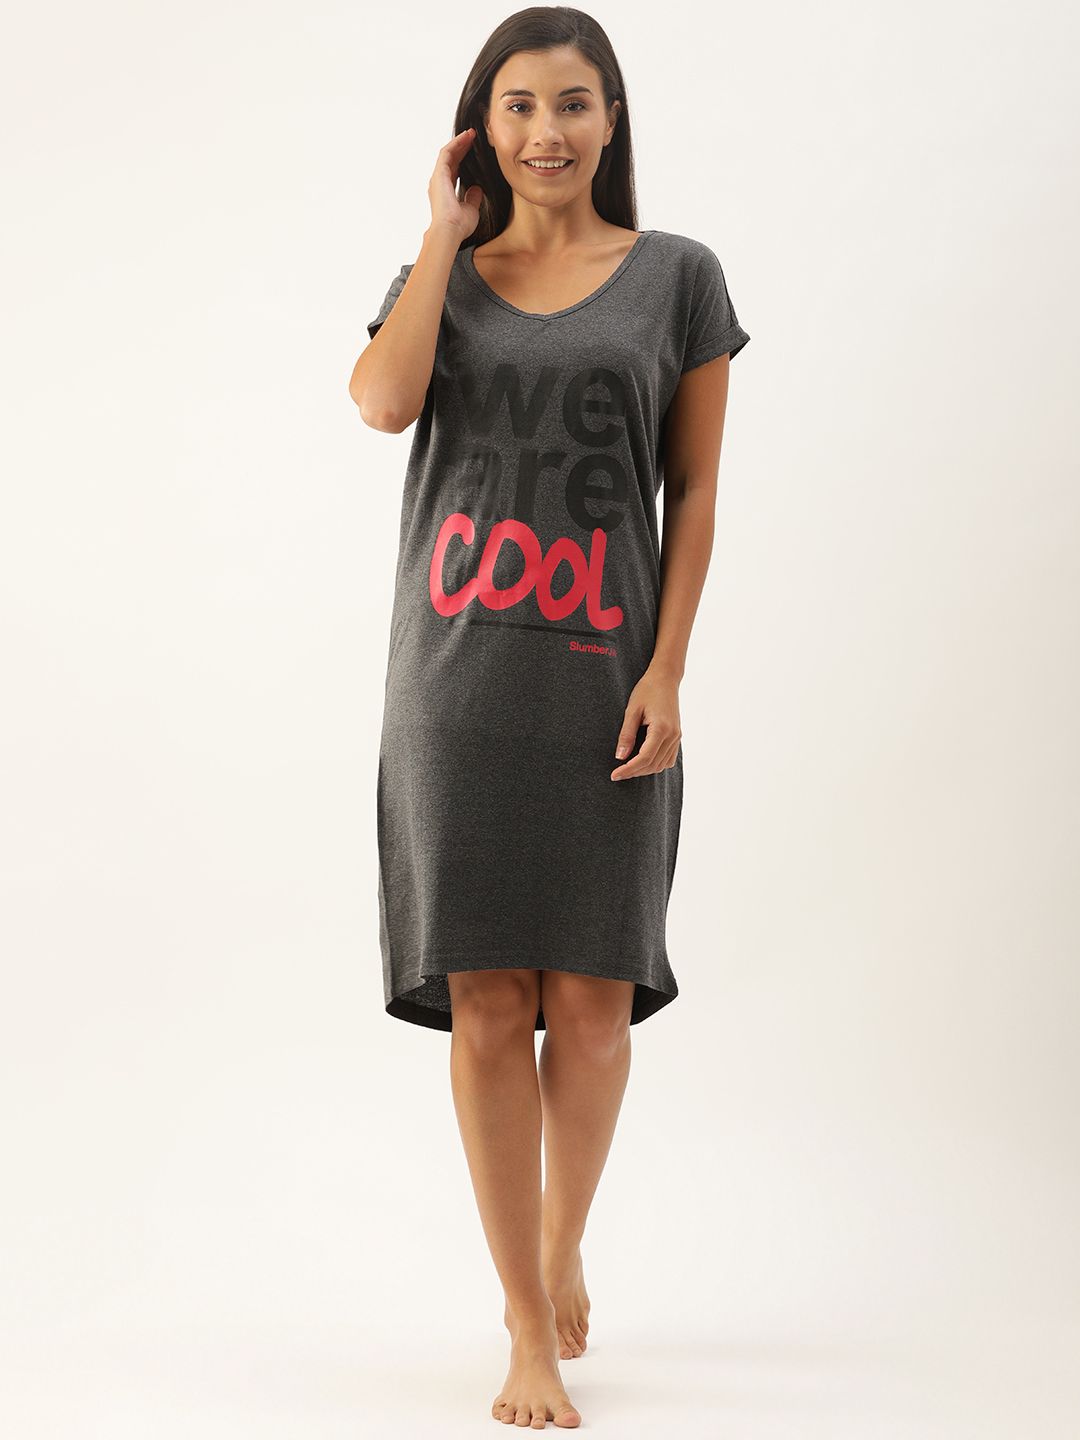 Loose Fit "We are Cool" Sleep Shirt - Colour Charcoal